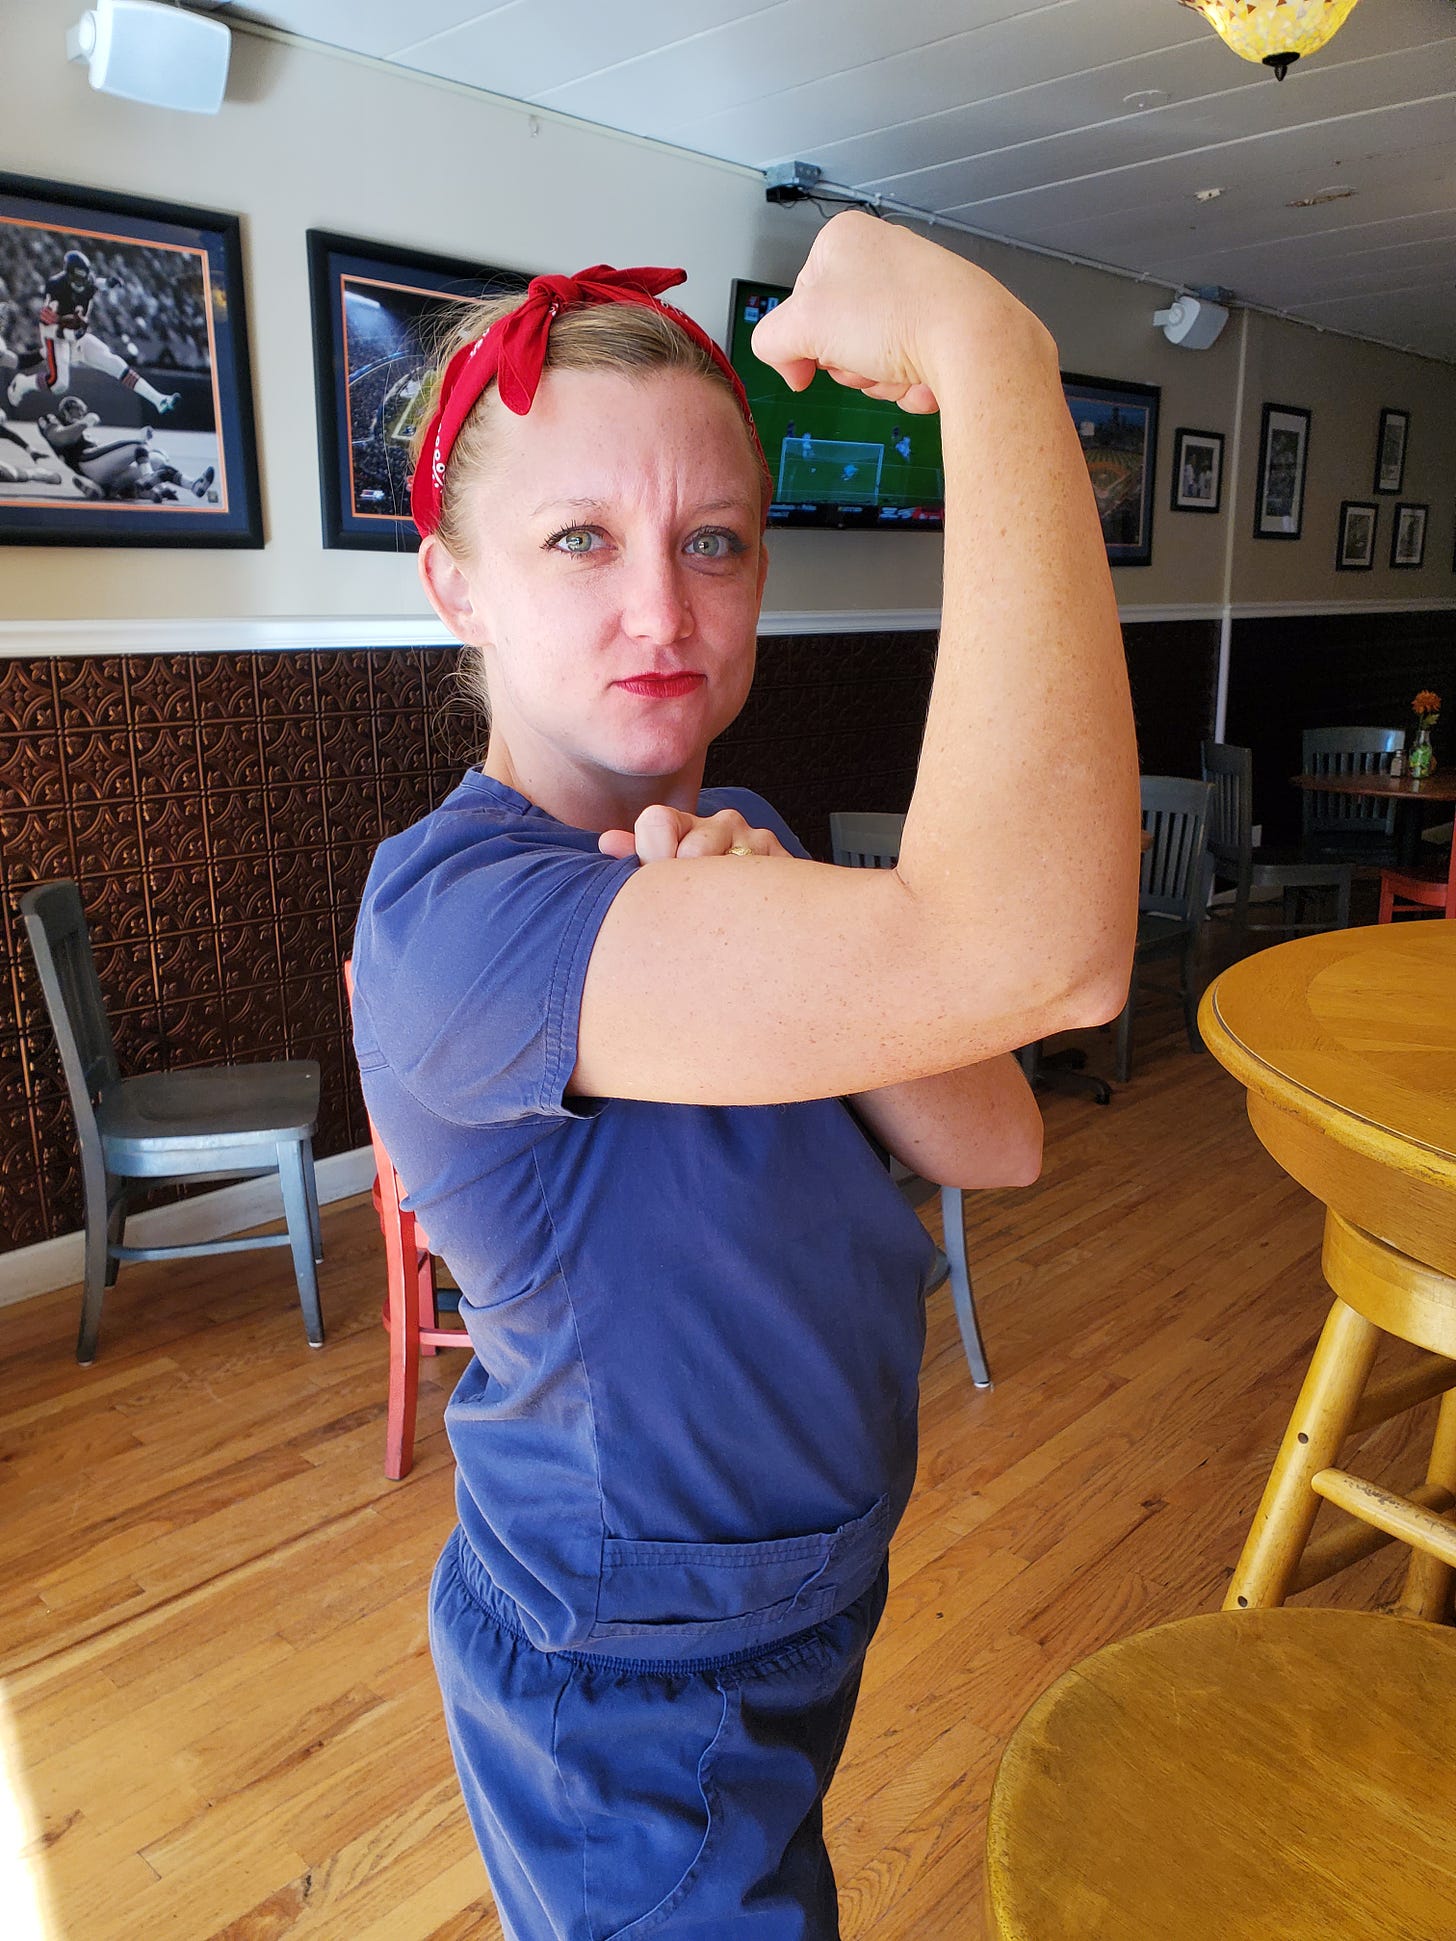 Woman wearing red bandana and blue scrubs flexing right bicep staring powerfully at the camera